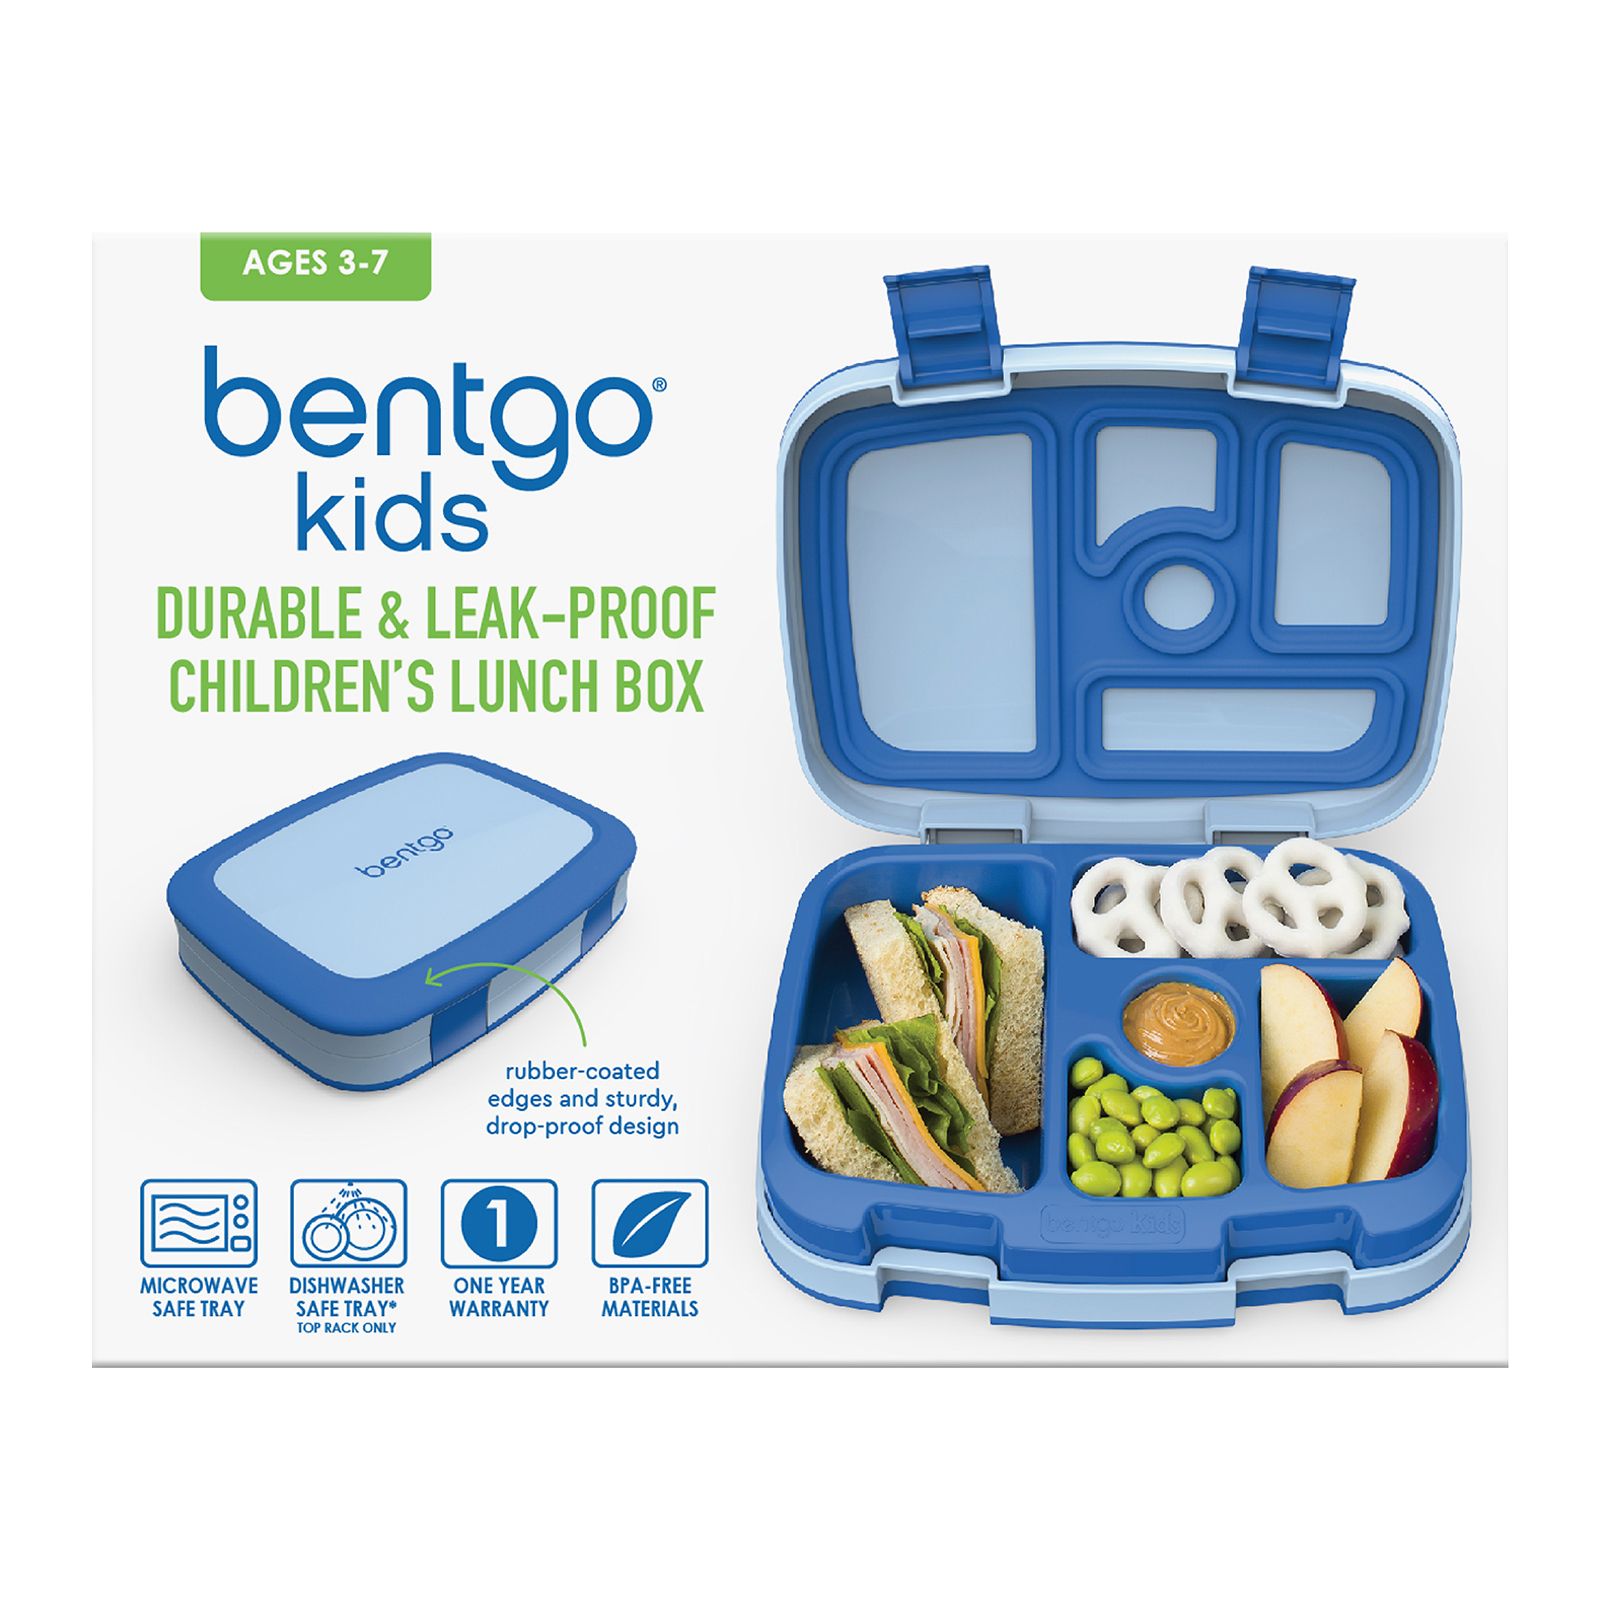 We're obsessed with our Bentgo Kids Chill lunchbox for school